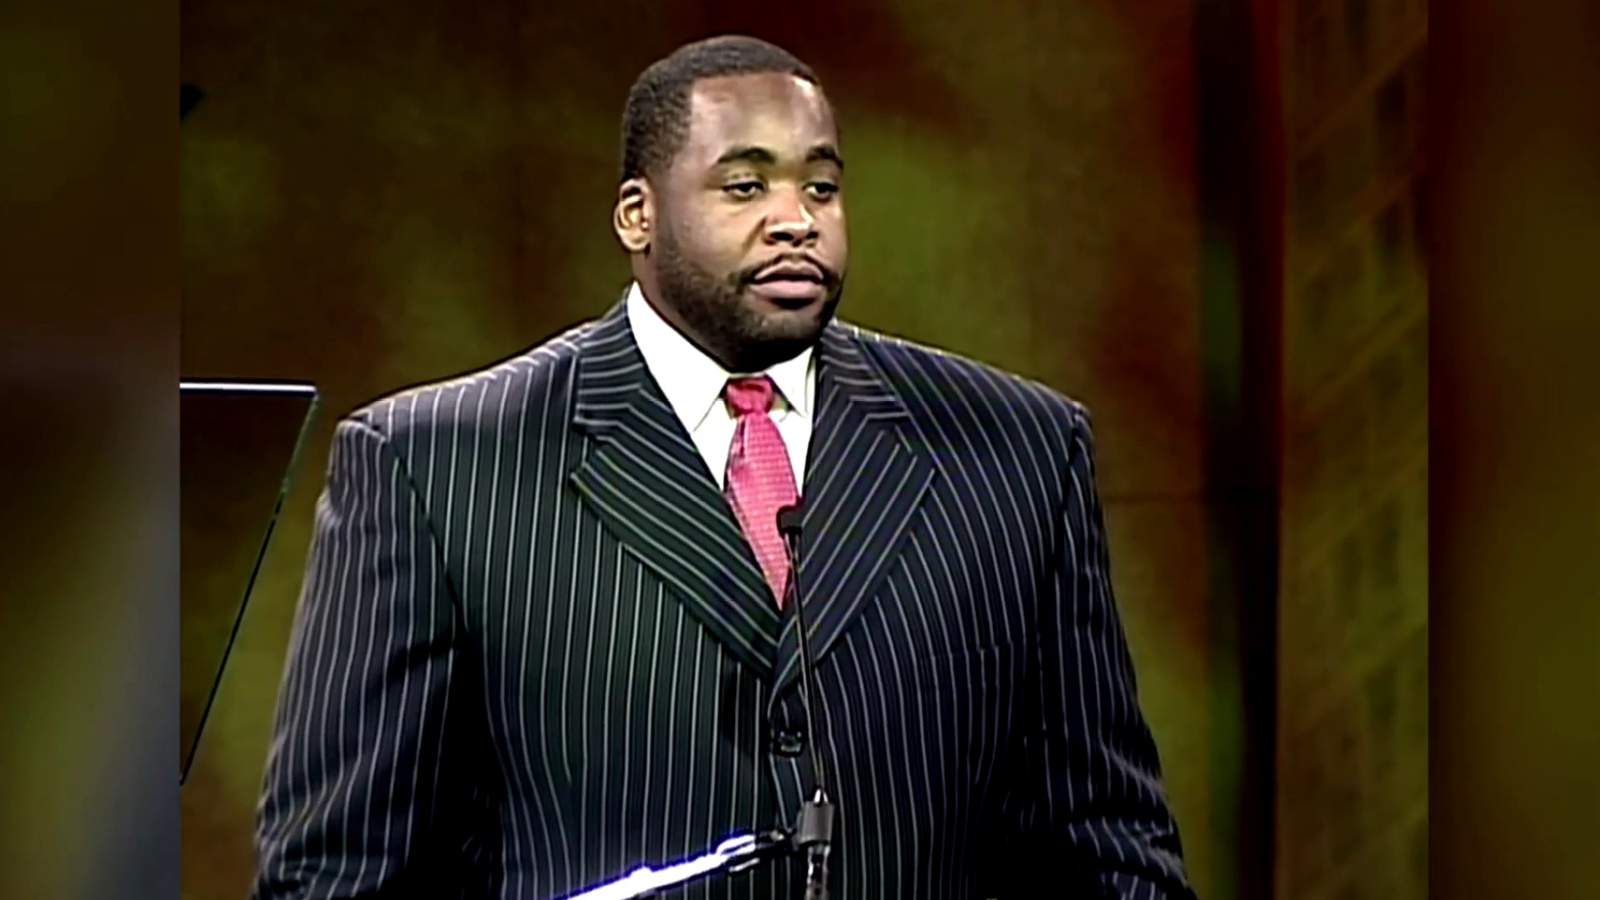 Could former Detroit Mayor Kwame Kilpatrick get released from prison due to COVID-19?